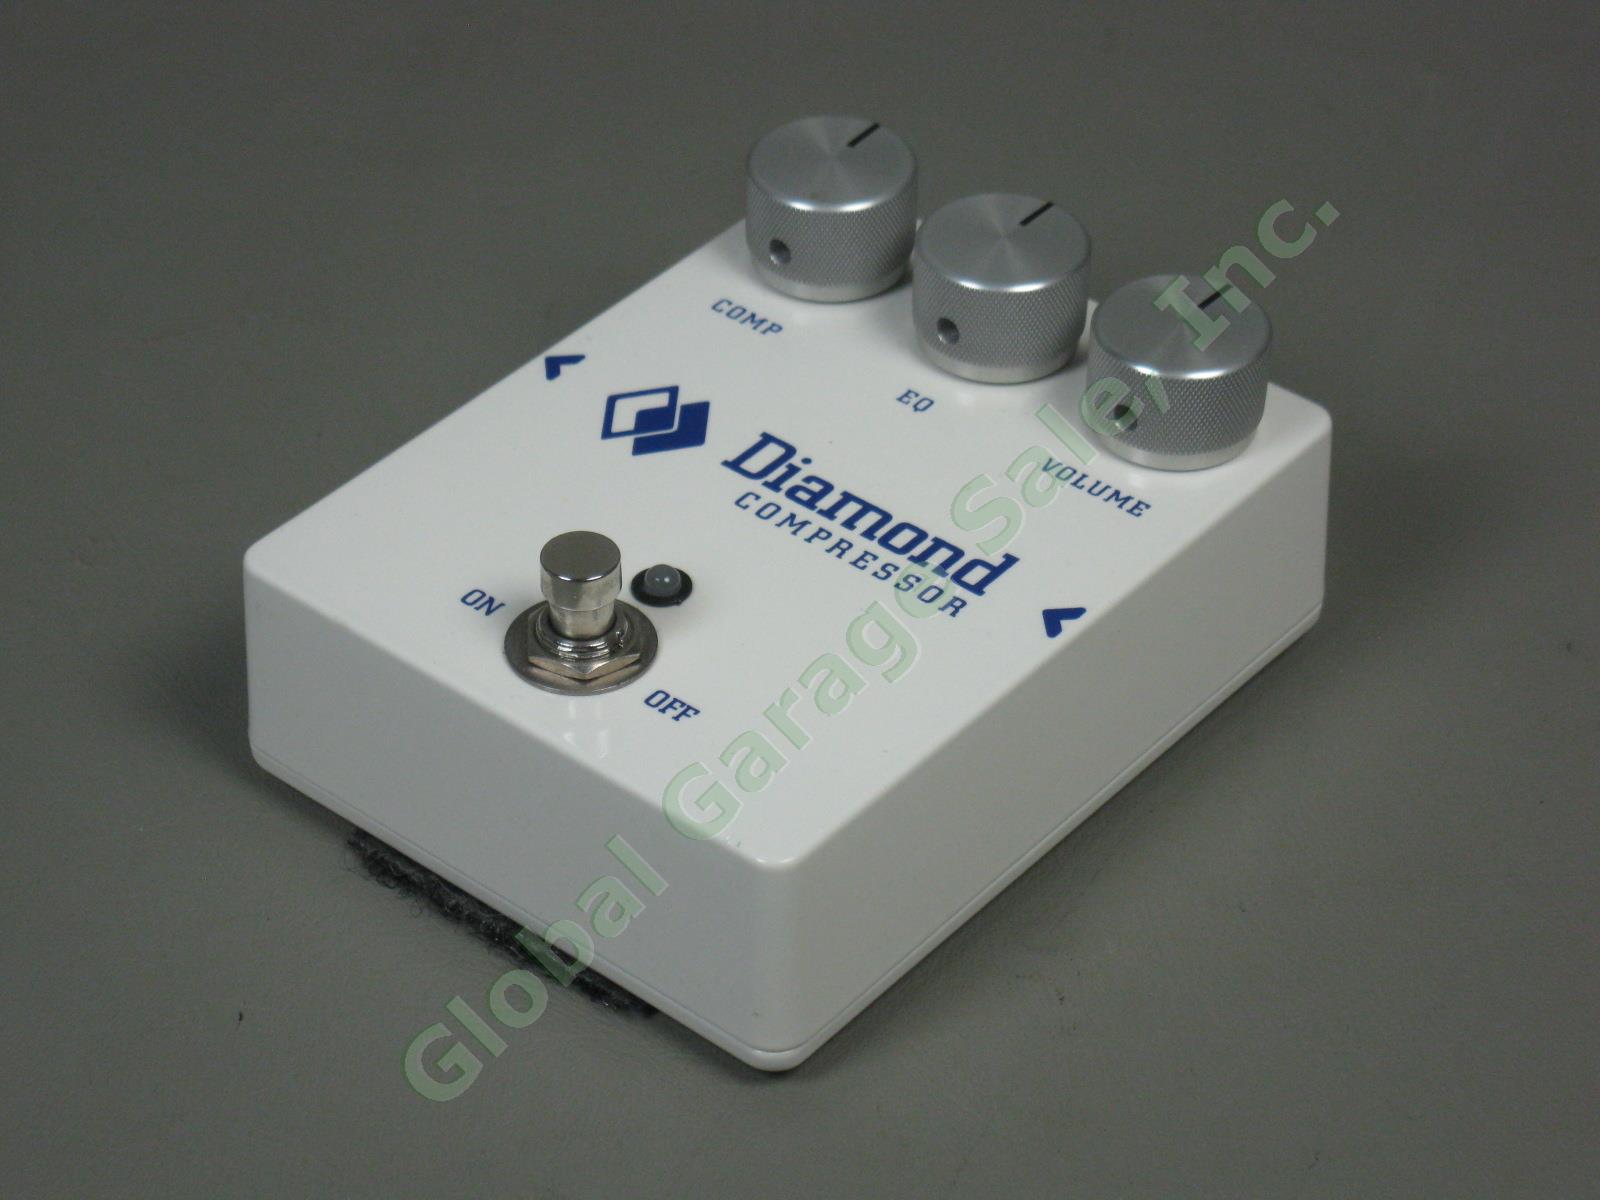 Diamond Compressor CPR-1 Guitar Effects Compression Pedal Rare White 1 Owner EXC 1